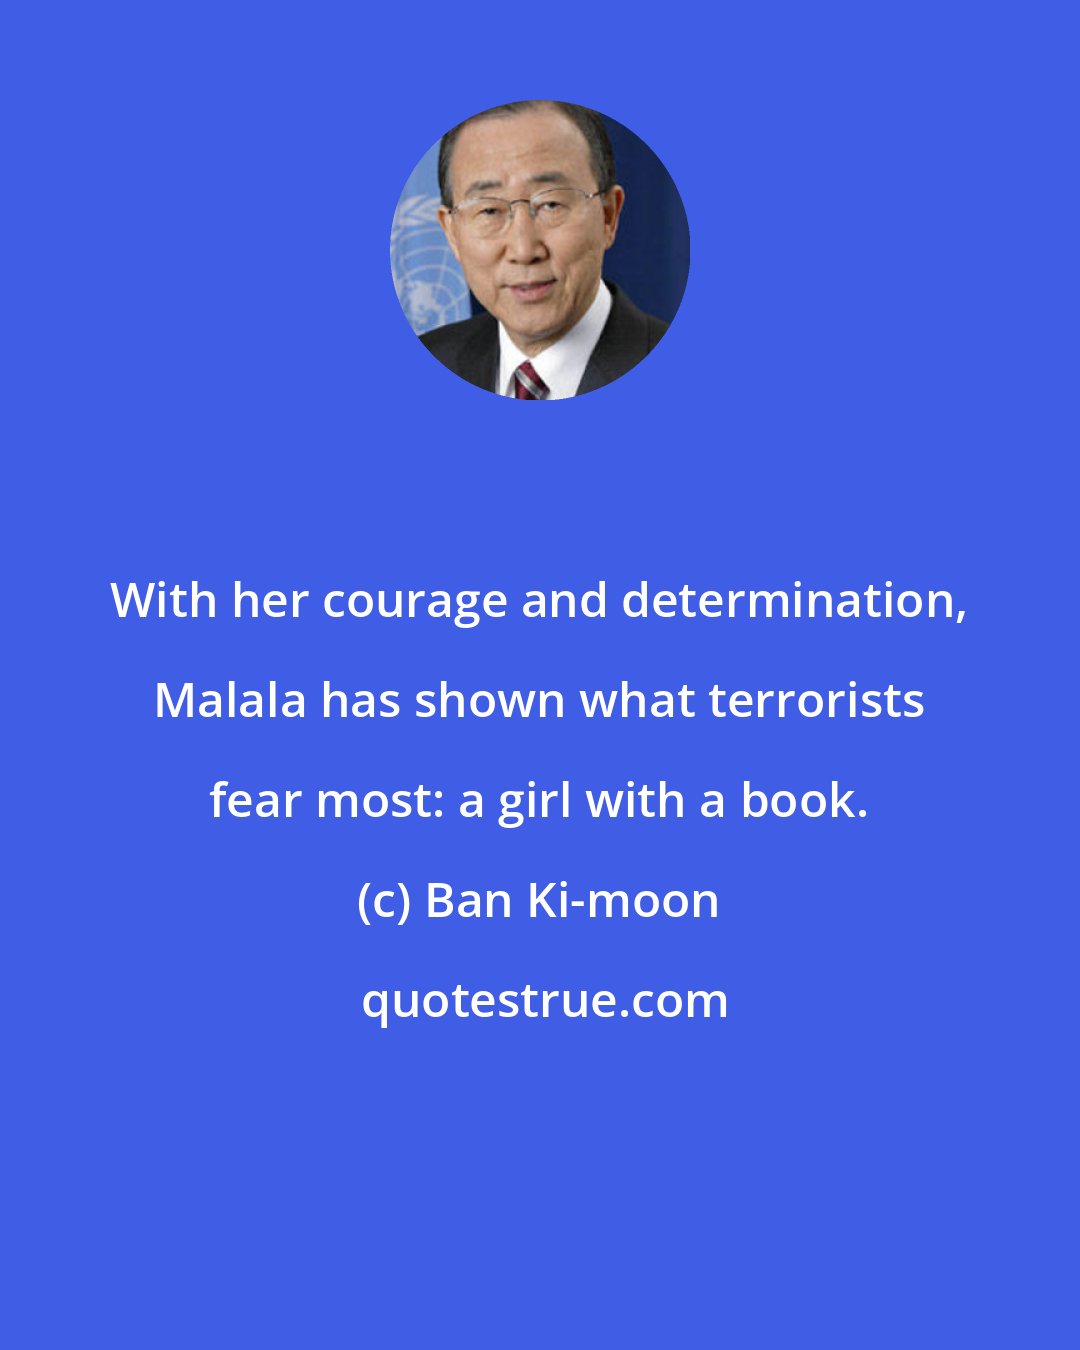 Ban Ki-moon: With her courage and determination, Malala has shown what terrorists fear most: a girl with a book.